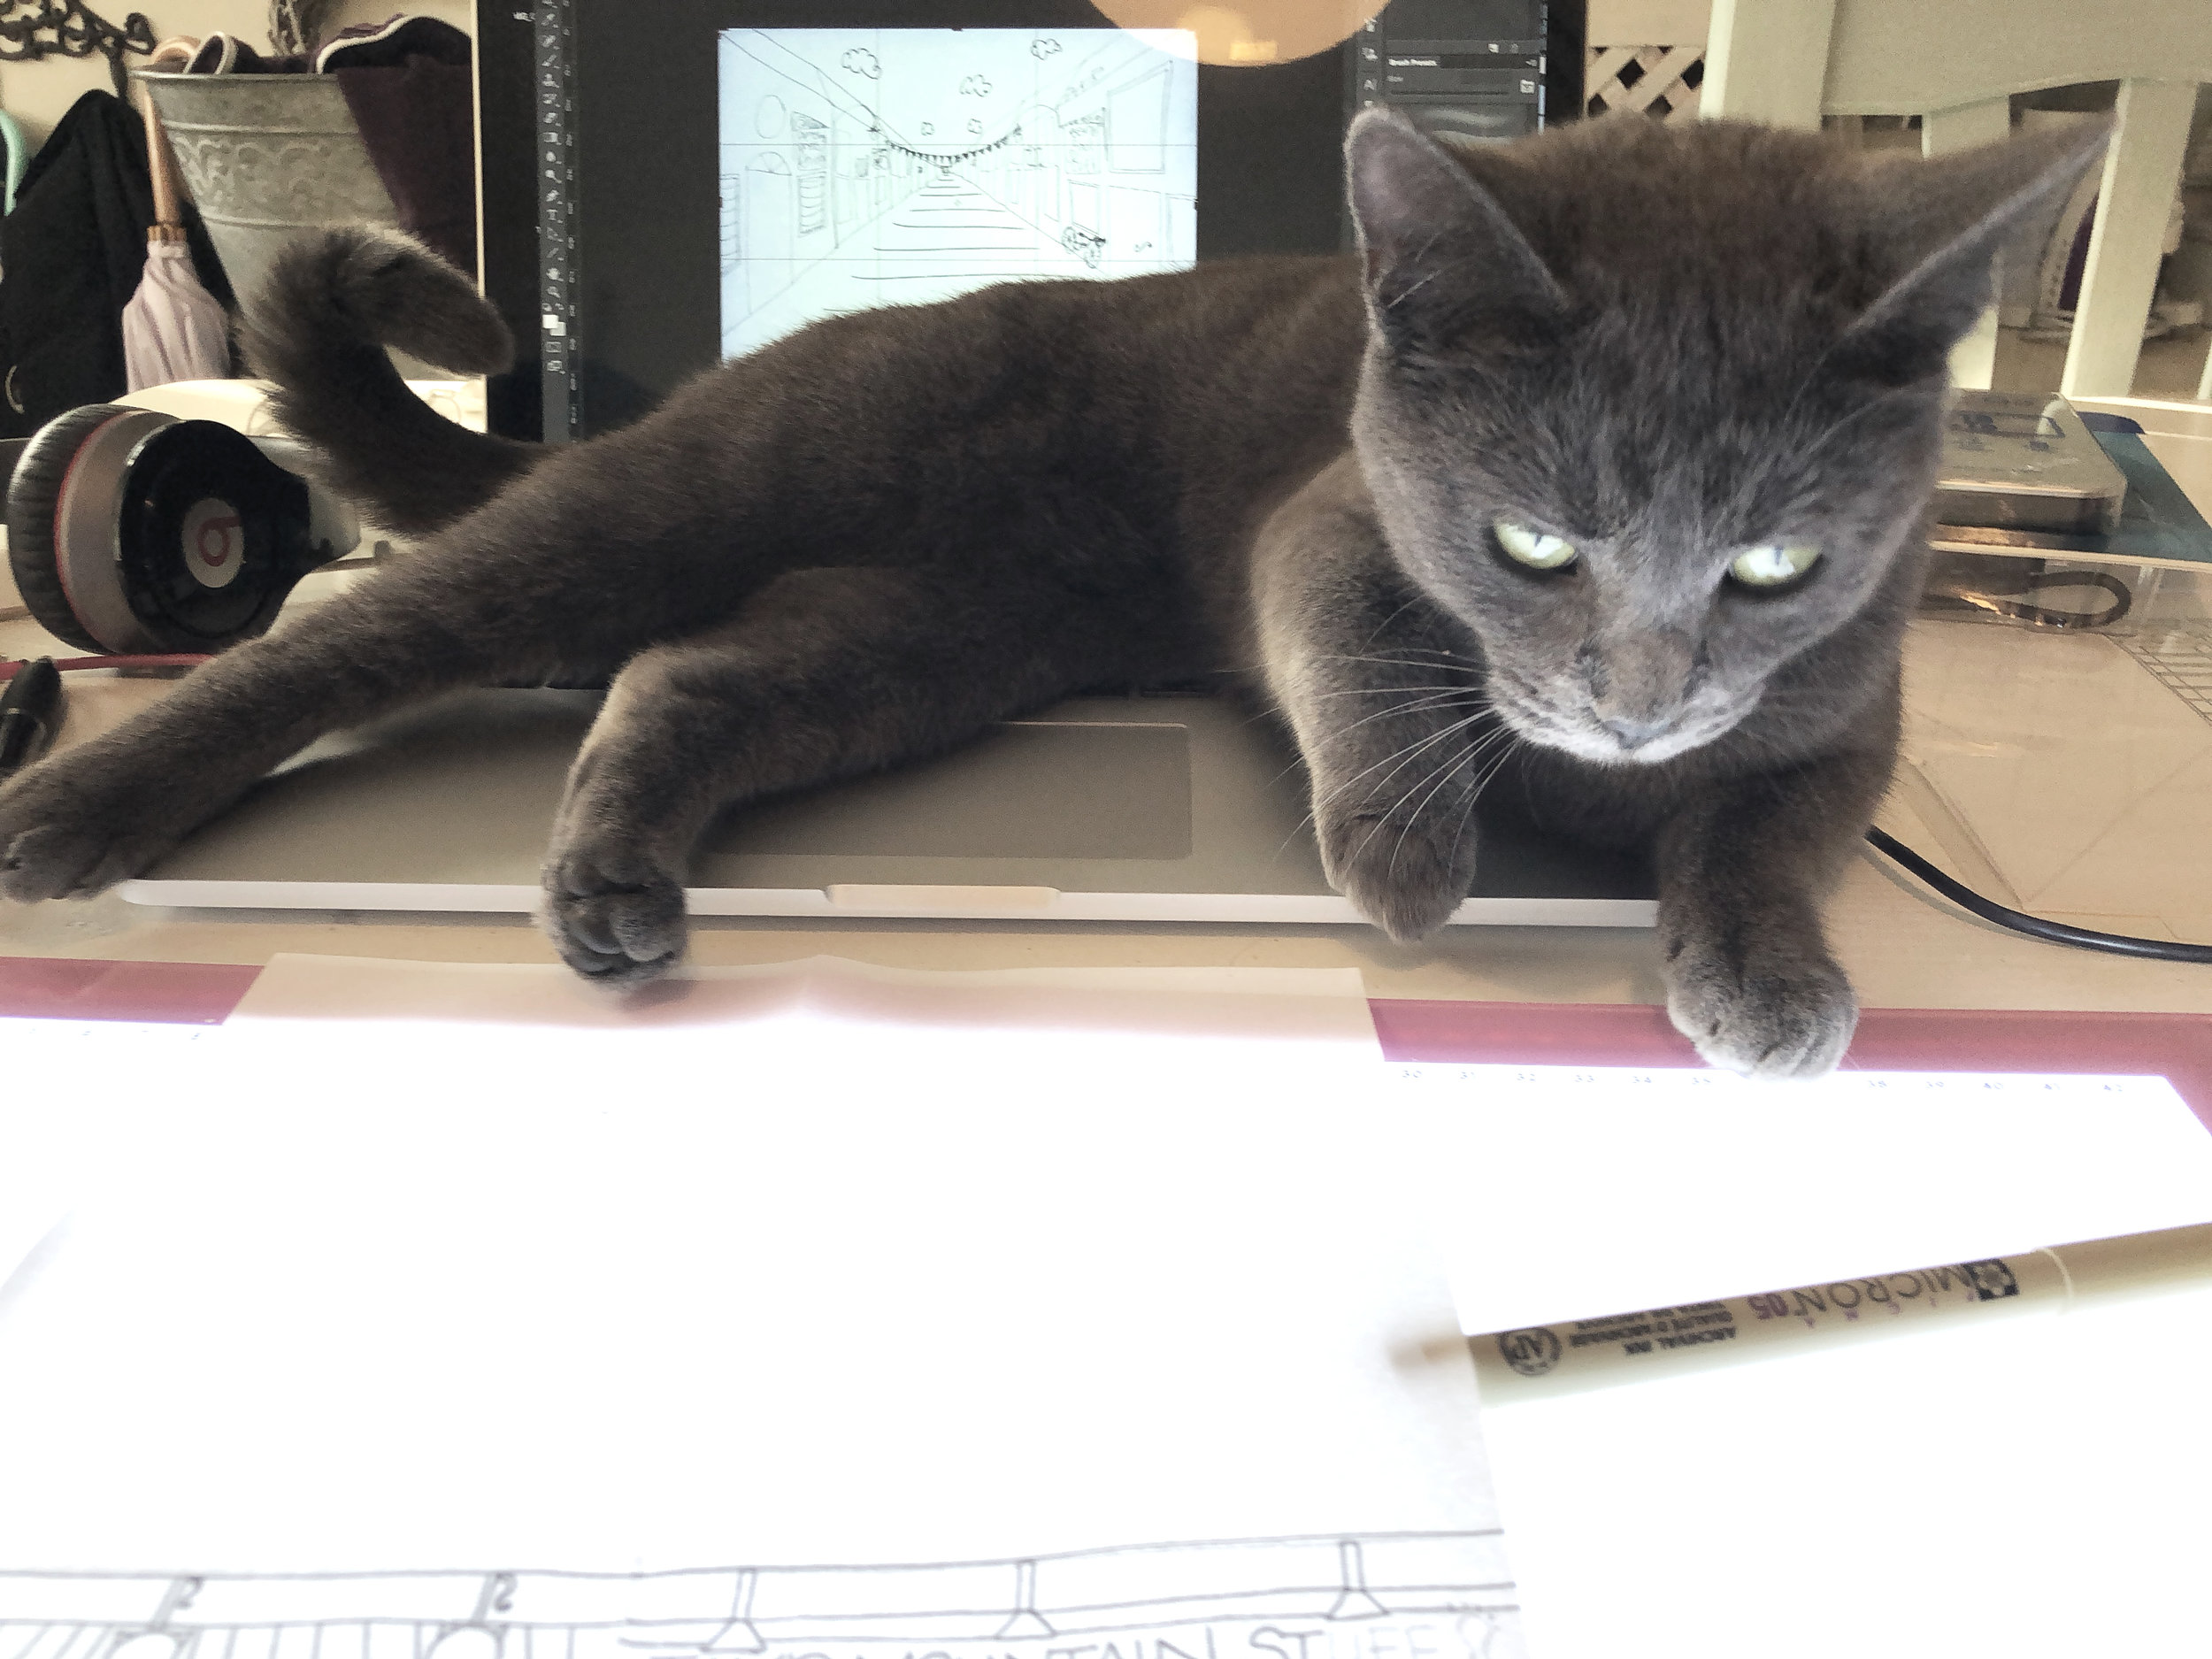 Dottie once again on the laptop | natalie palmer sutton | how to argue with a cat.JPG